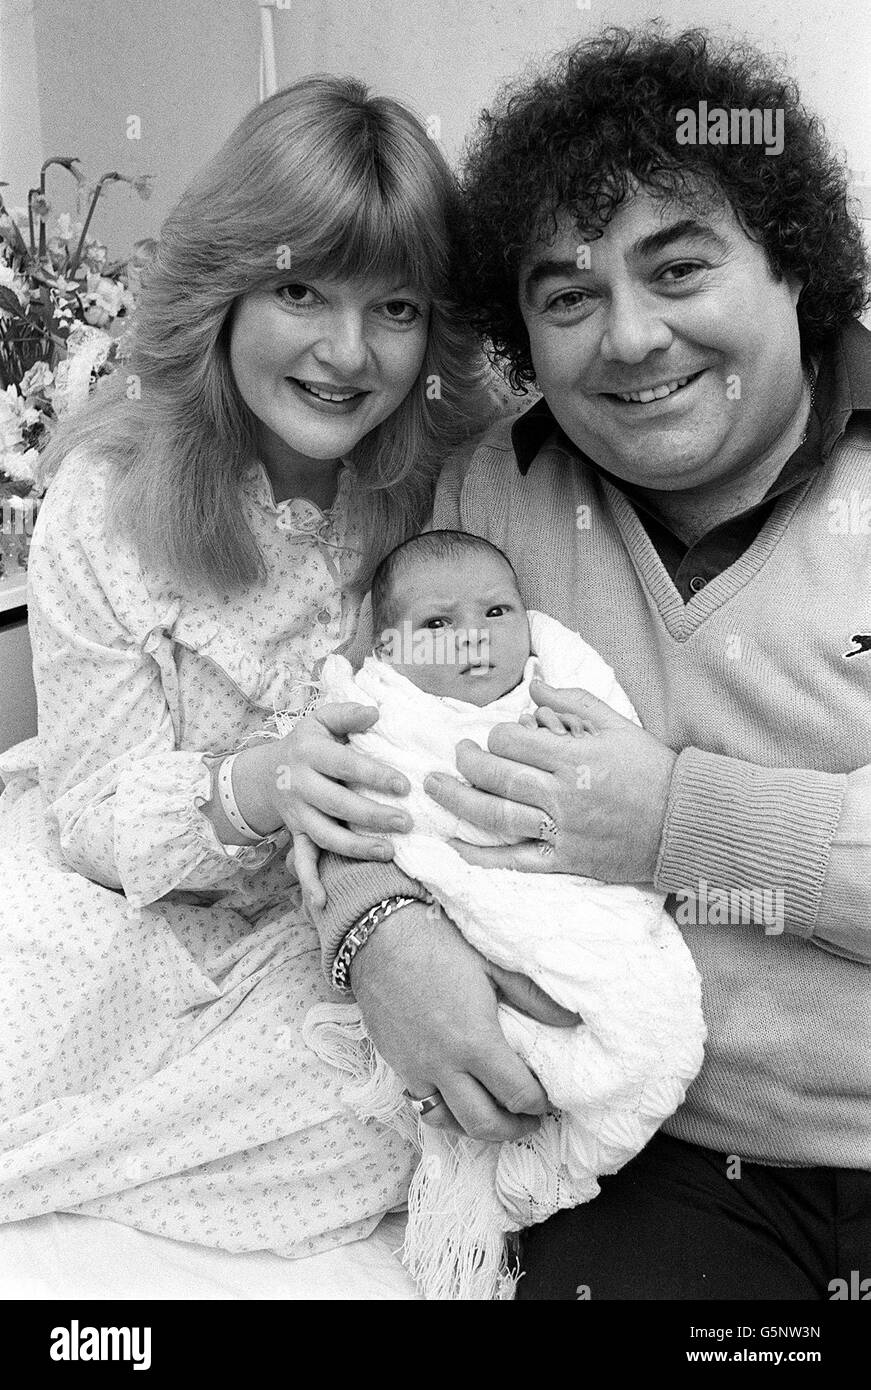 Comedian Eddie Large from the comedy duo Little and Large at Bristol Hospital with his five day old son Ryan and wife Patsy. Stock Photo